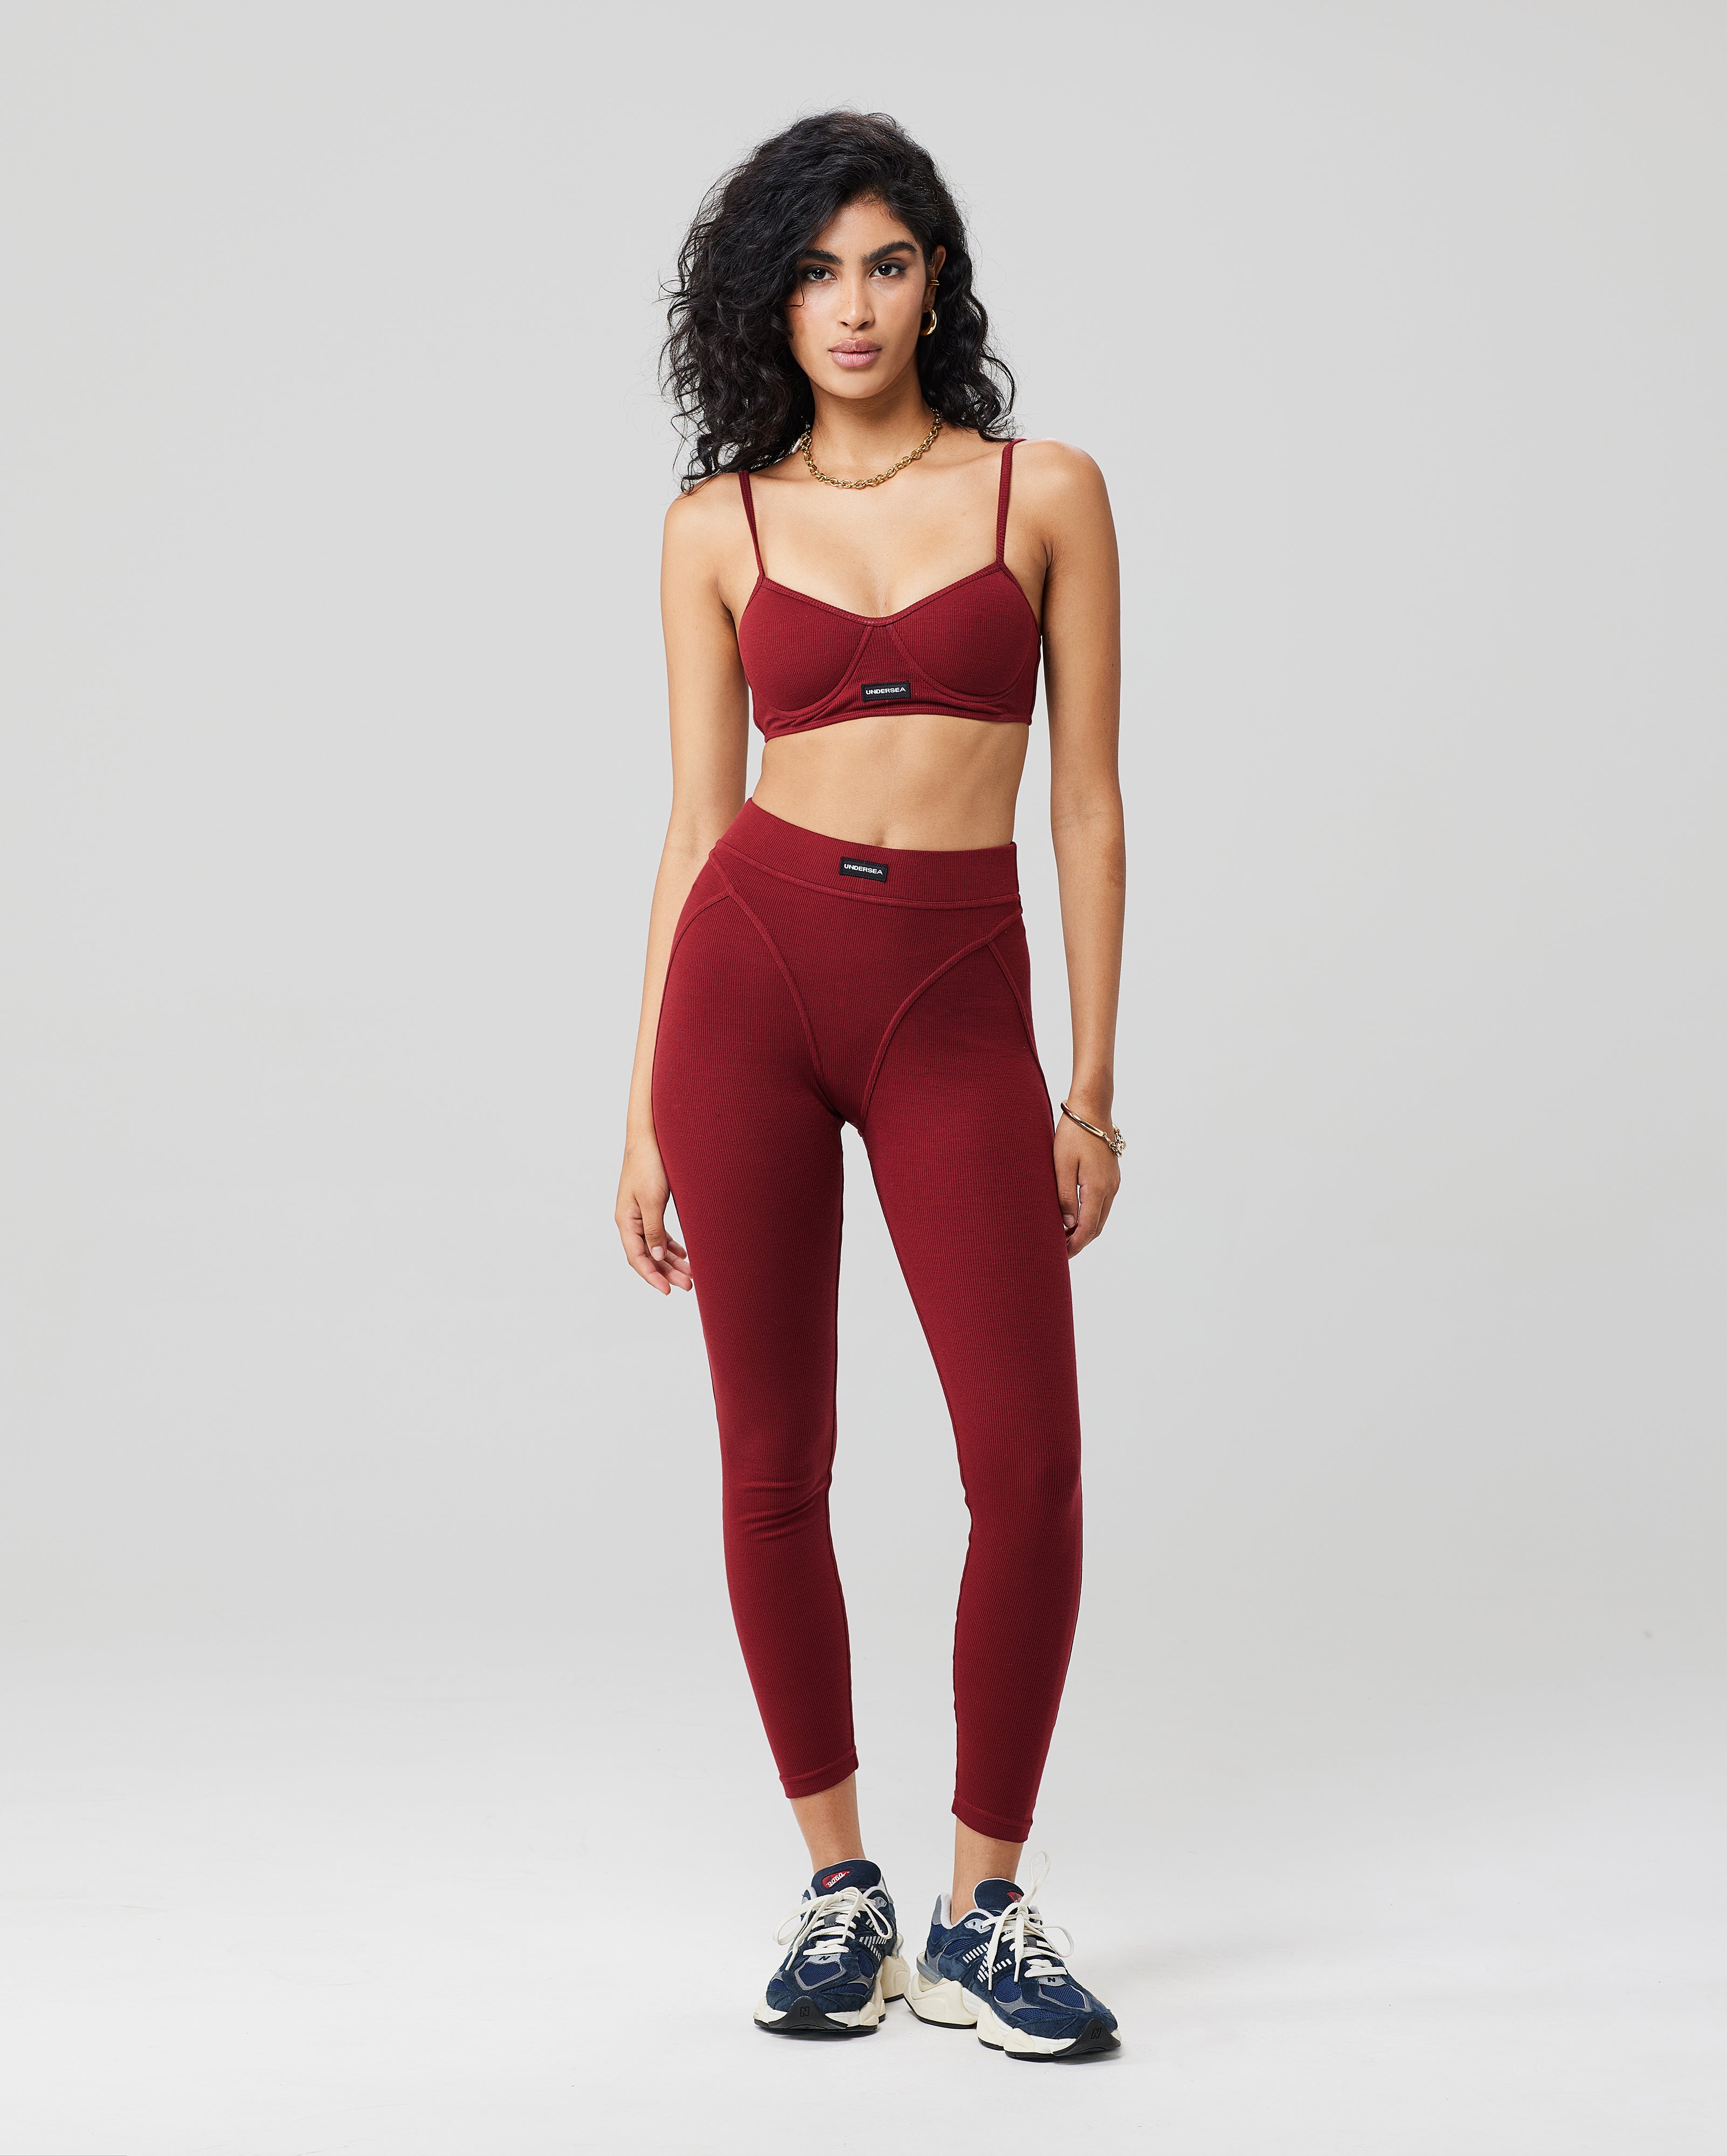 CORE ACTIVE TOP 01 - FALL RED